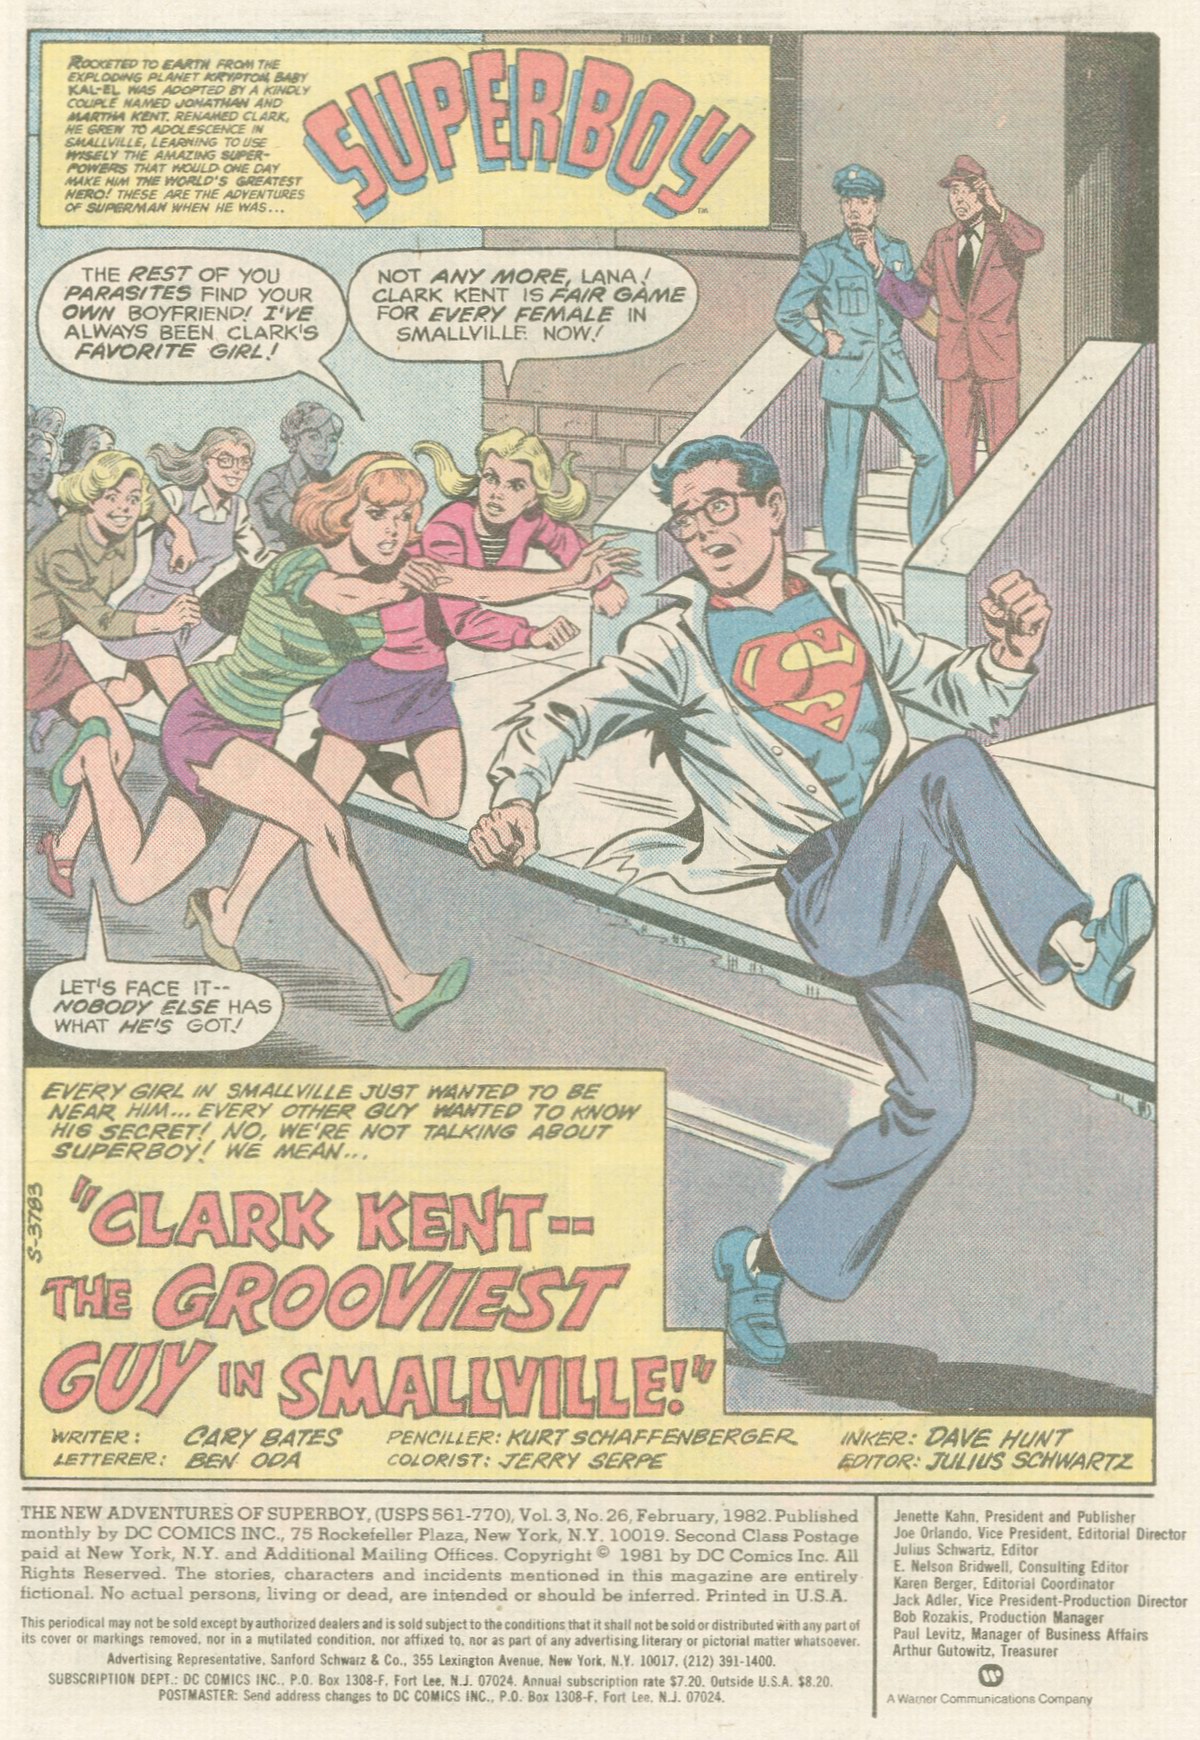 The New Adventures of Superboy 26 Page 1